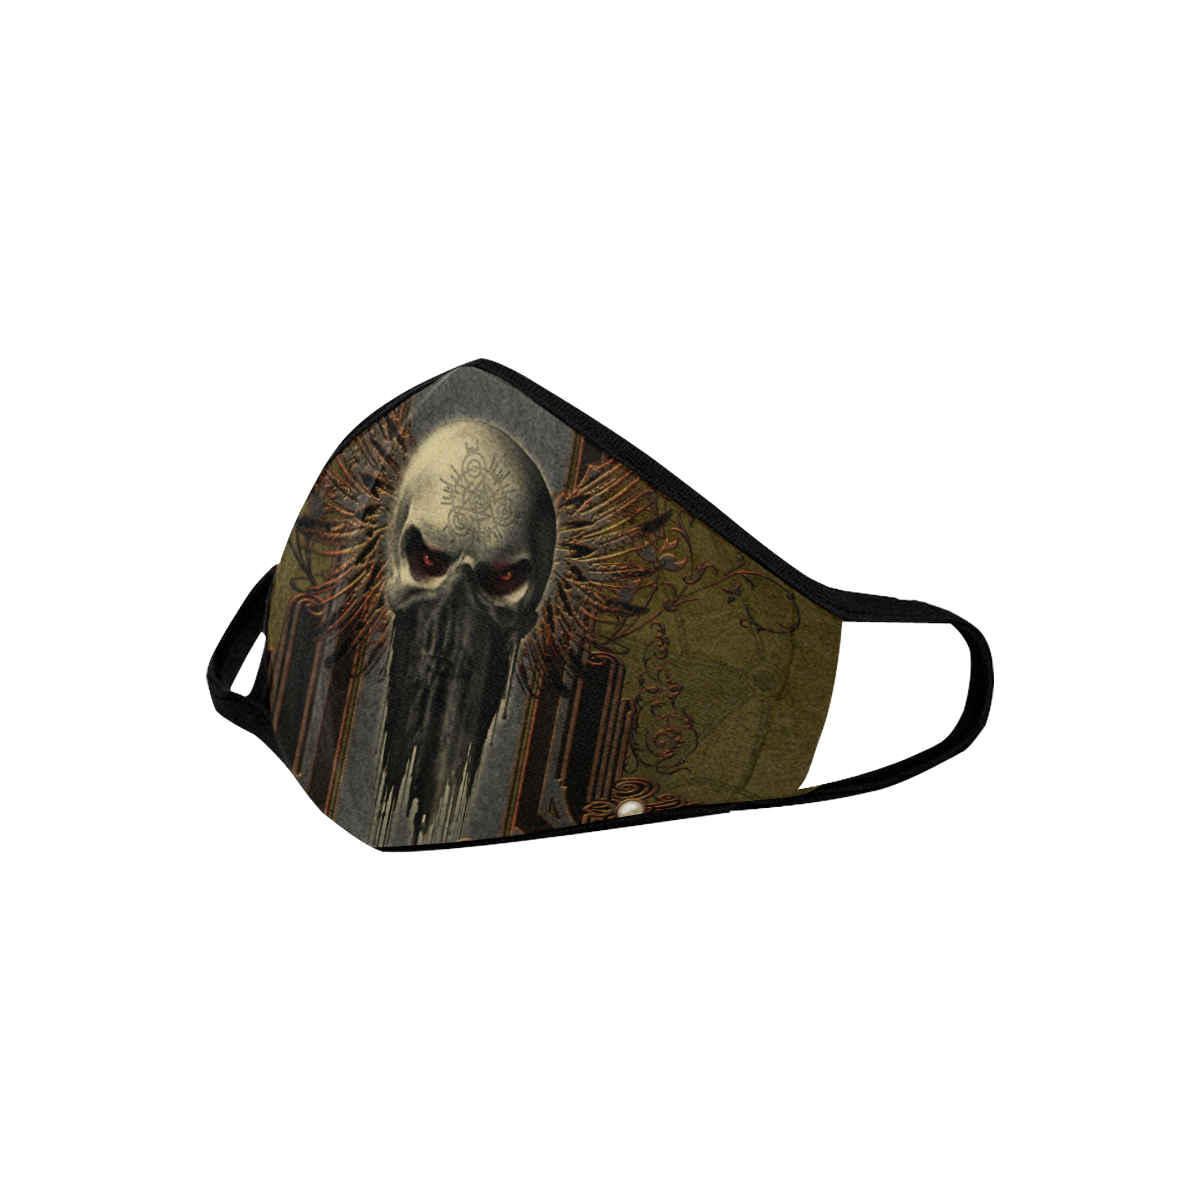 Awesome dark skull Mouth Mask